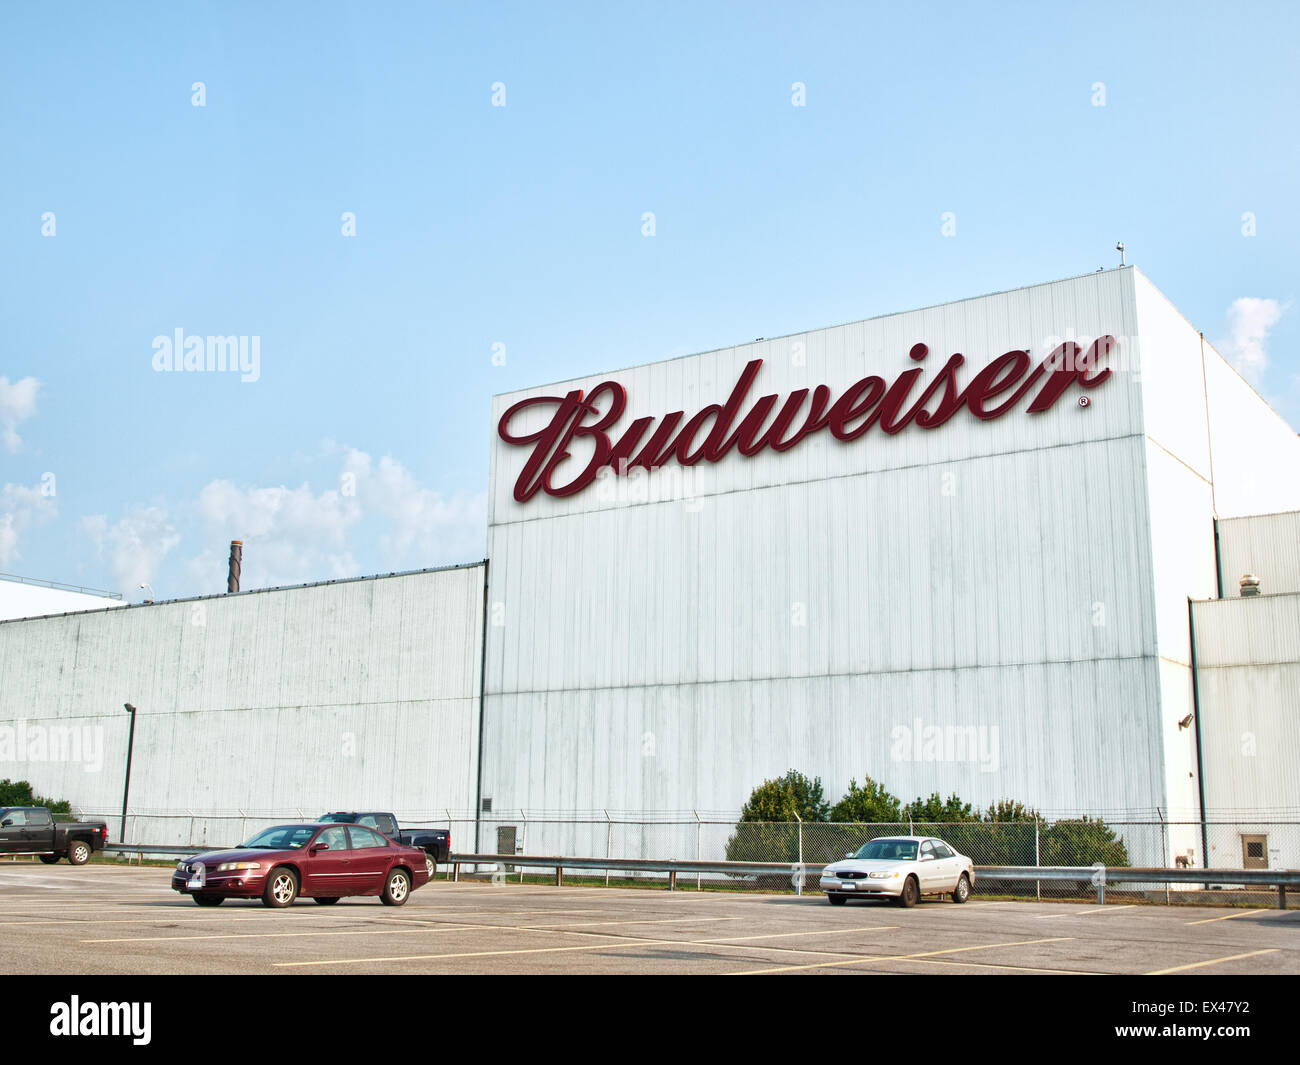 Budweiser plant located in Baldwinsville, New York on a Sunday morning Stock Photo